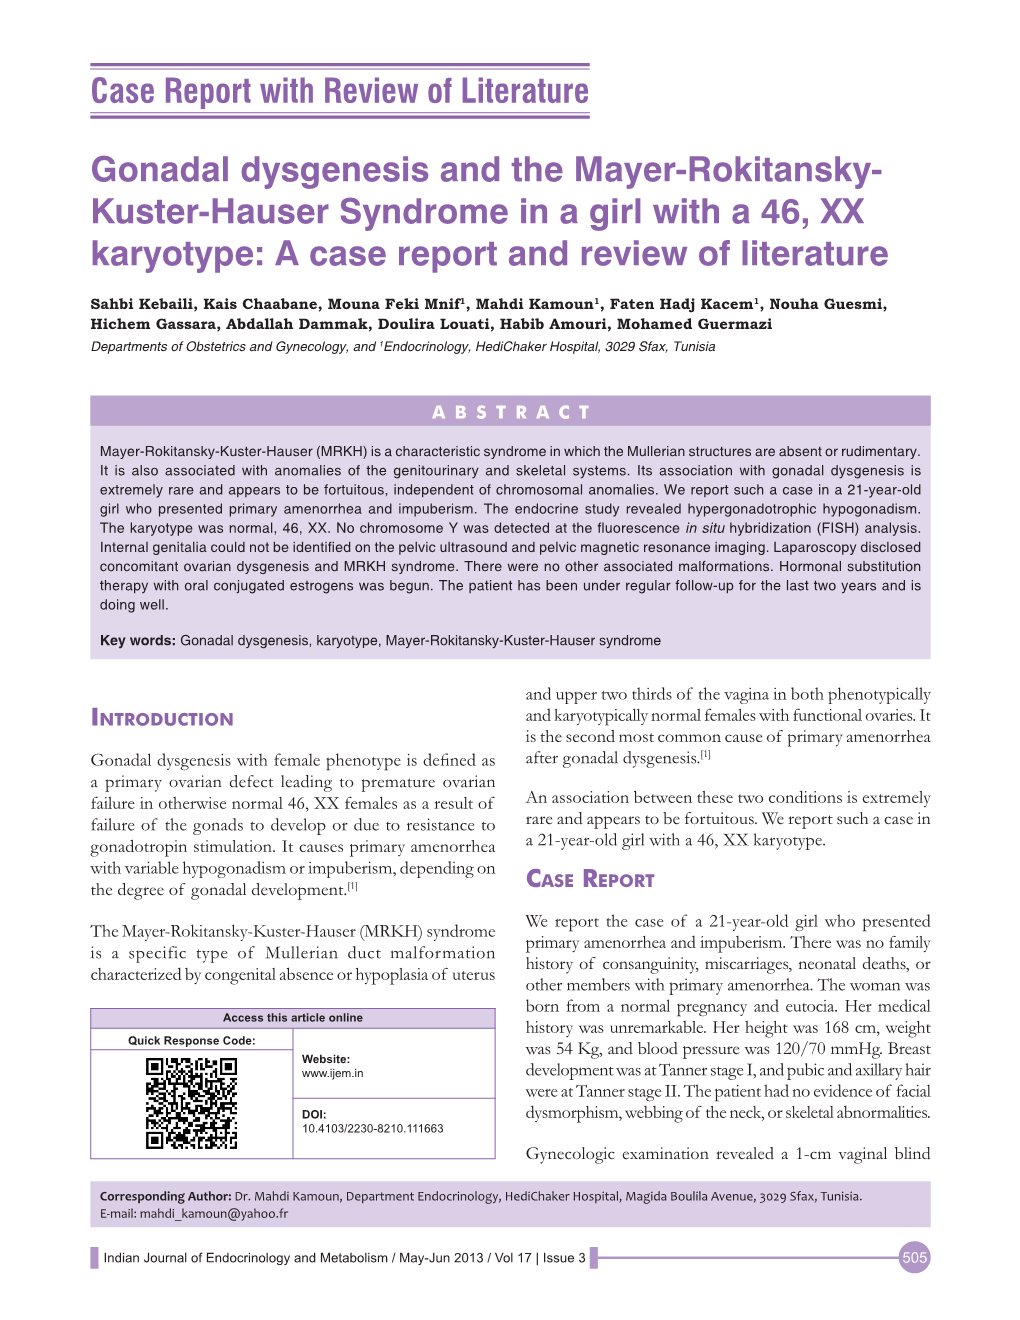 Gonadal Dysgenesis and the Mayer-Rokitansky- Kuster‑Hauser Syndrome in a Girl with a 46, XX Karyotype: a Case Report and Review of Literature